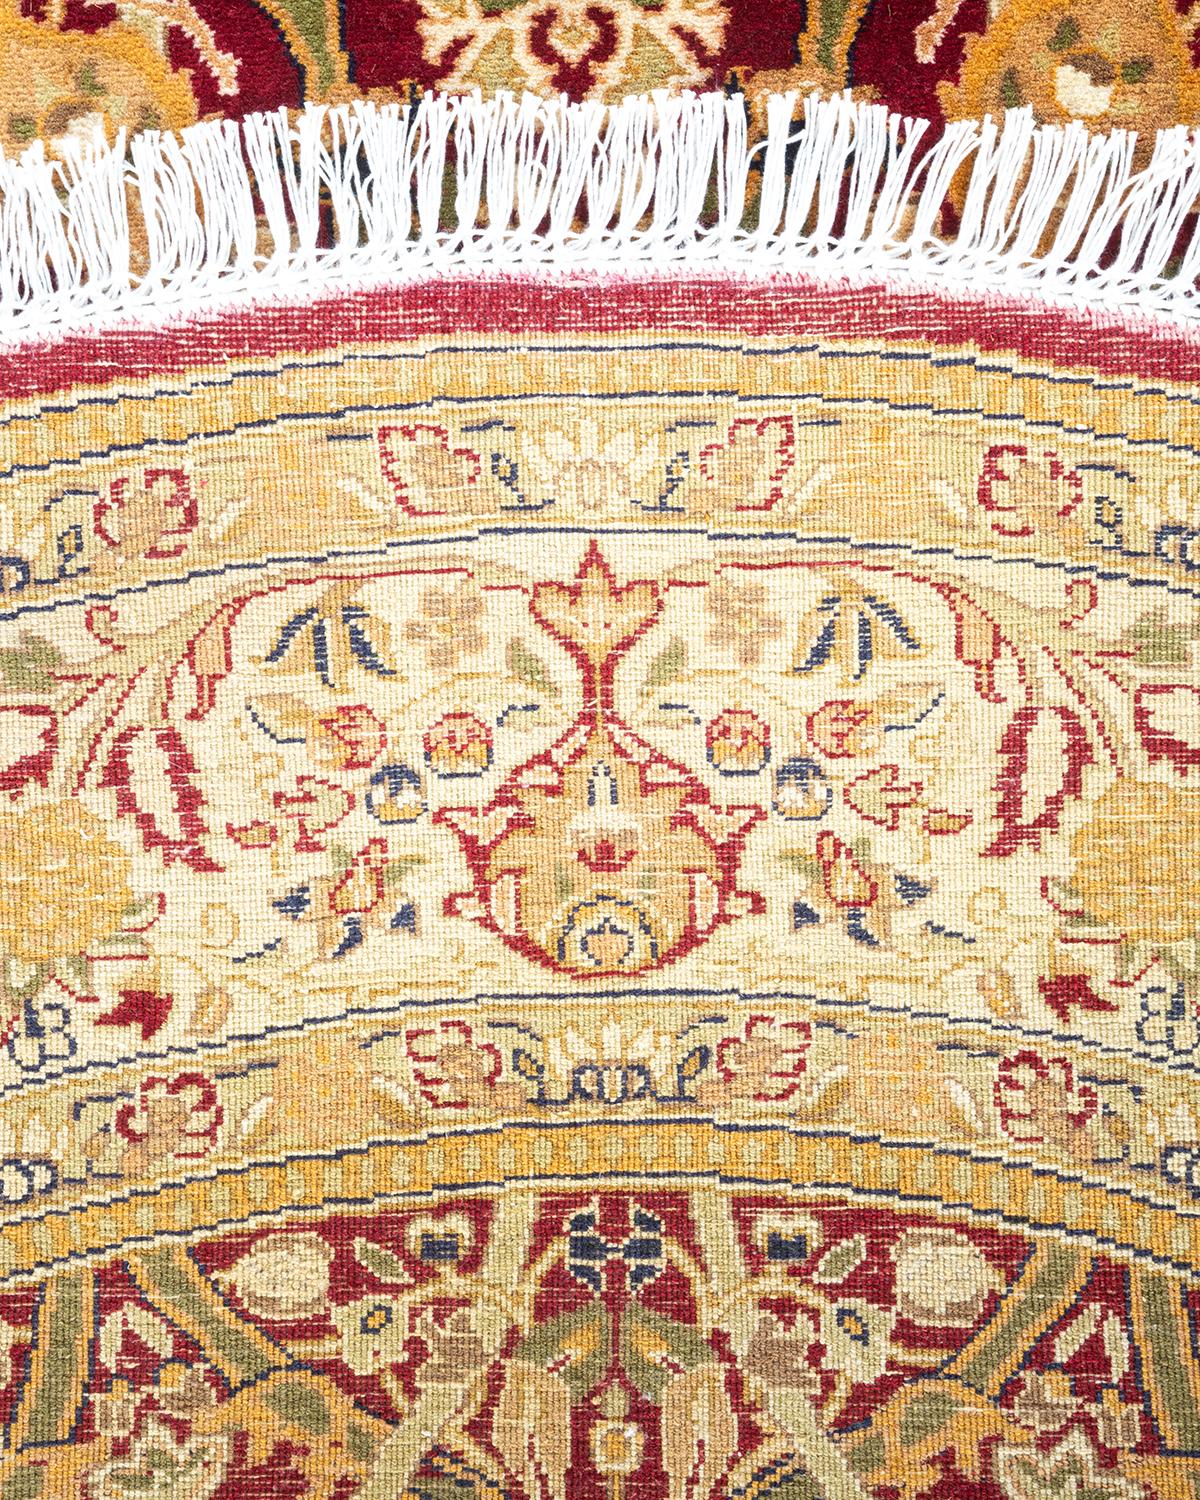 Traditional Mogul Hand Knotted Wool Red Round Area Rug In New Condition For Sale In Norwalk, CT